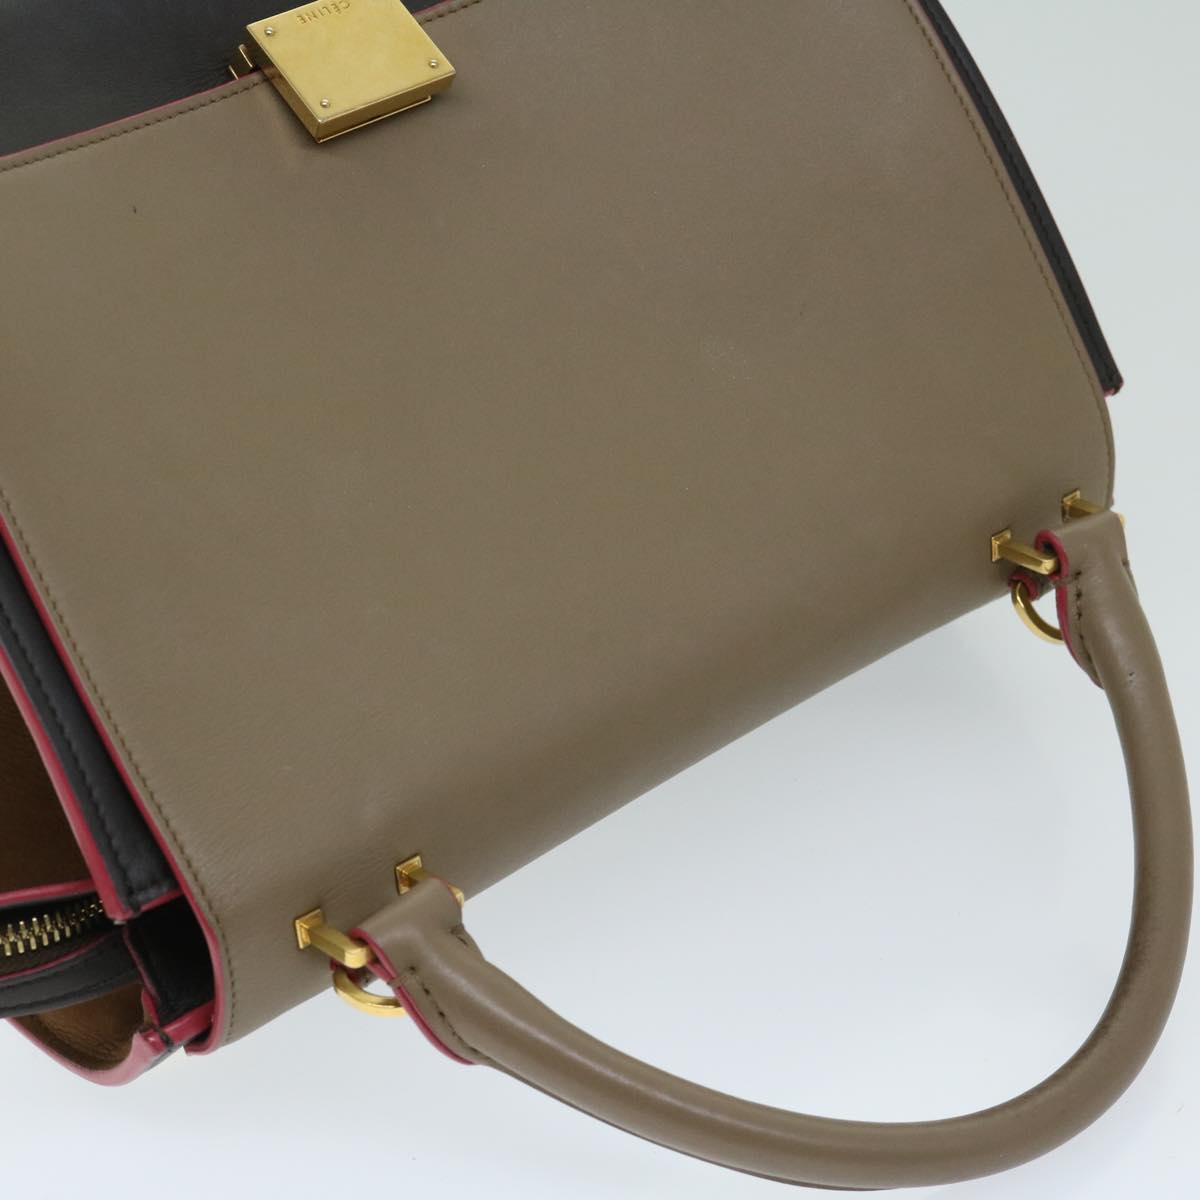 CELINE Trapeze Hand Bag Leather 2way Brown Auth 68058